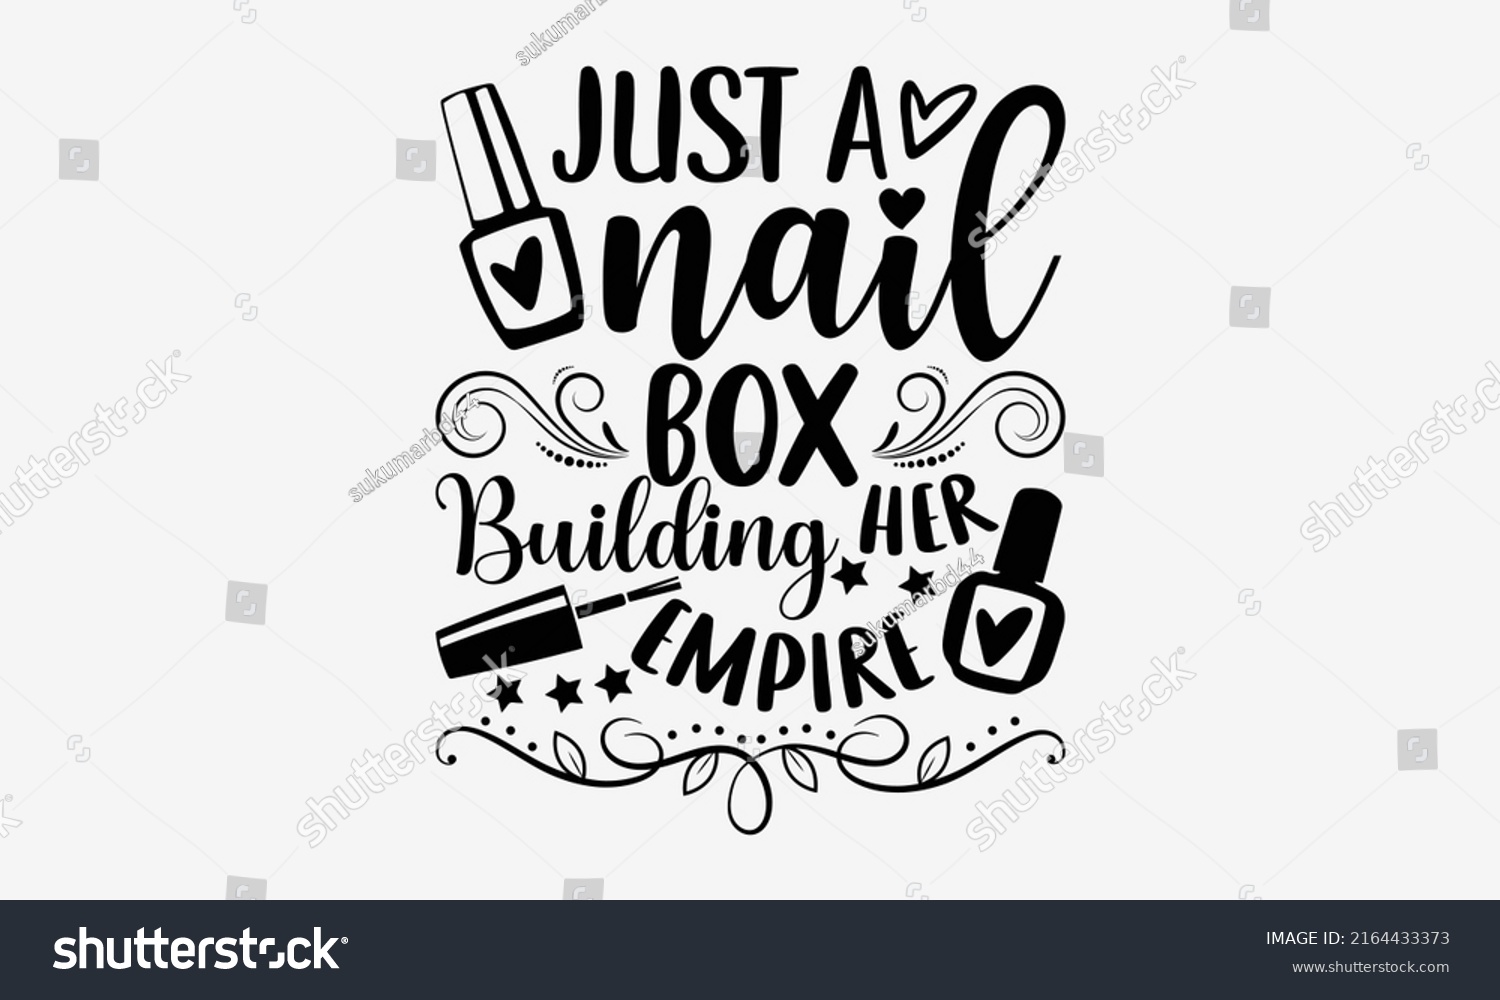 SVG of Just a nail box building her empire - Nail Tech  t shirt design, Hand drawn lettering phrase, Calligraphy graphic design, SVG Files for Cutting Cricut and Silhouette svg